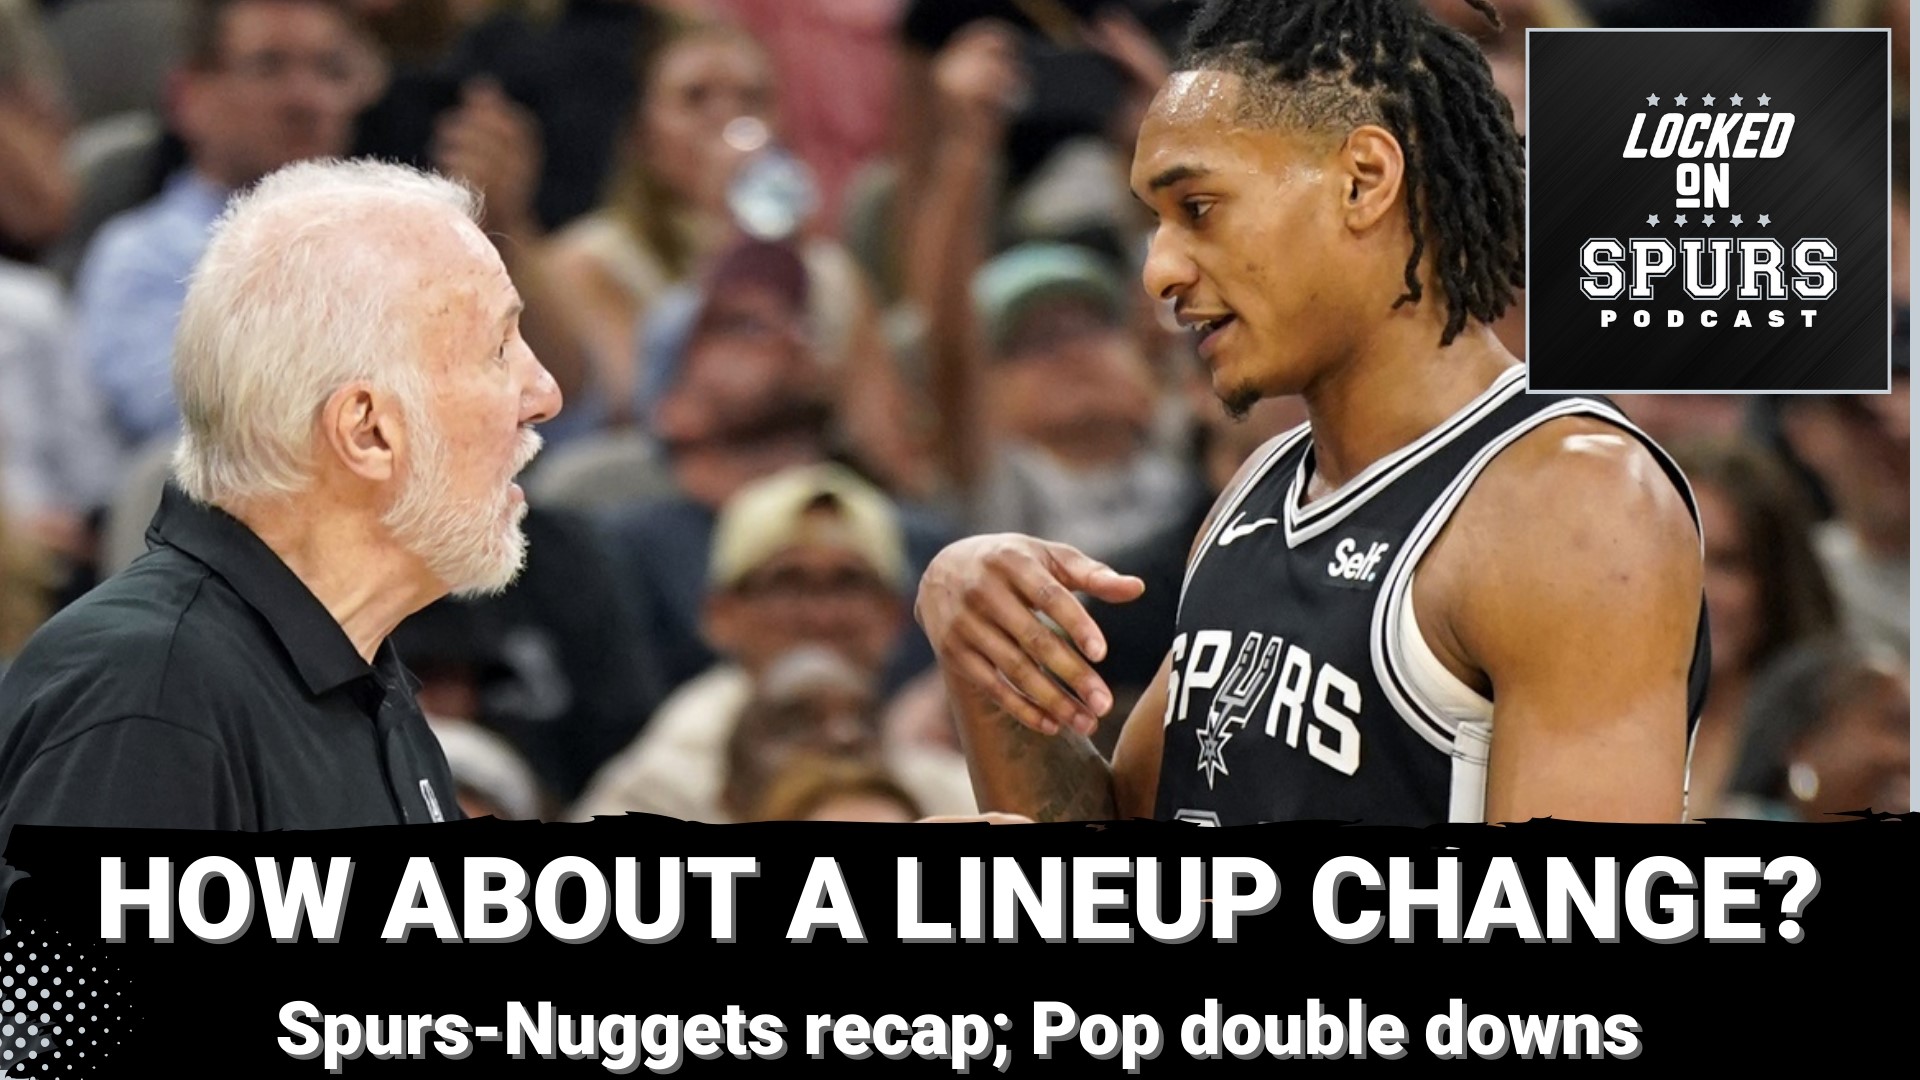 Also, Popovich isn't backing down from asking fans to not boo.